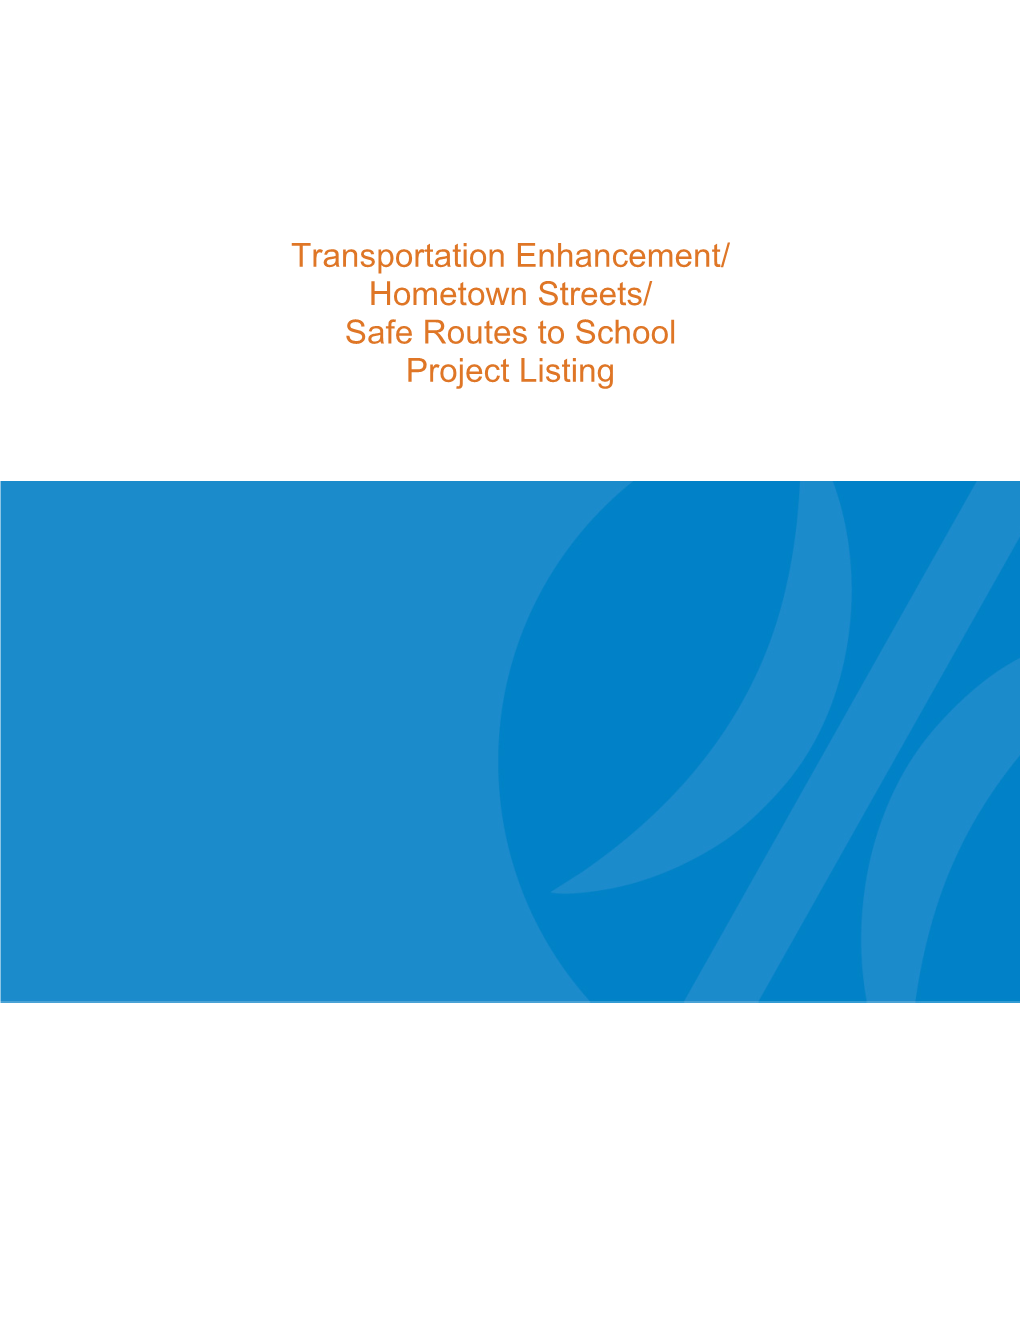 Hometown Streets/ Safe Routes to School Project Listing